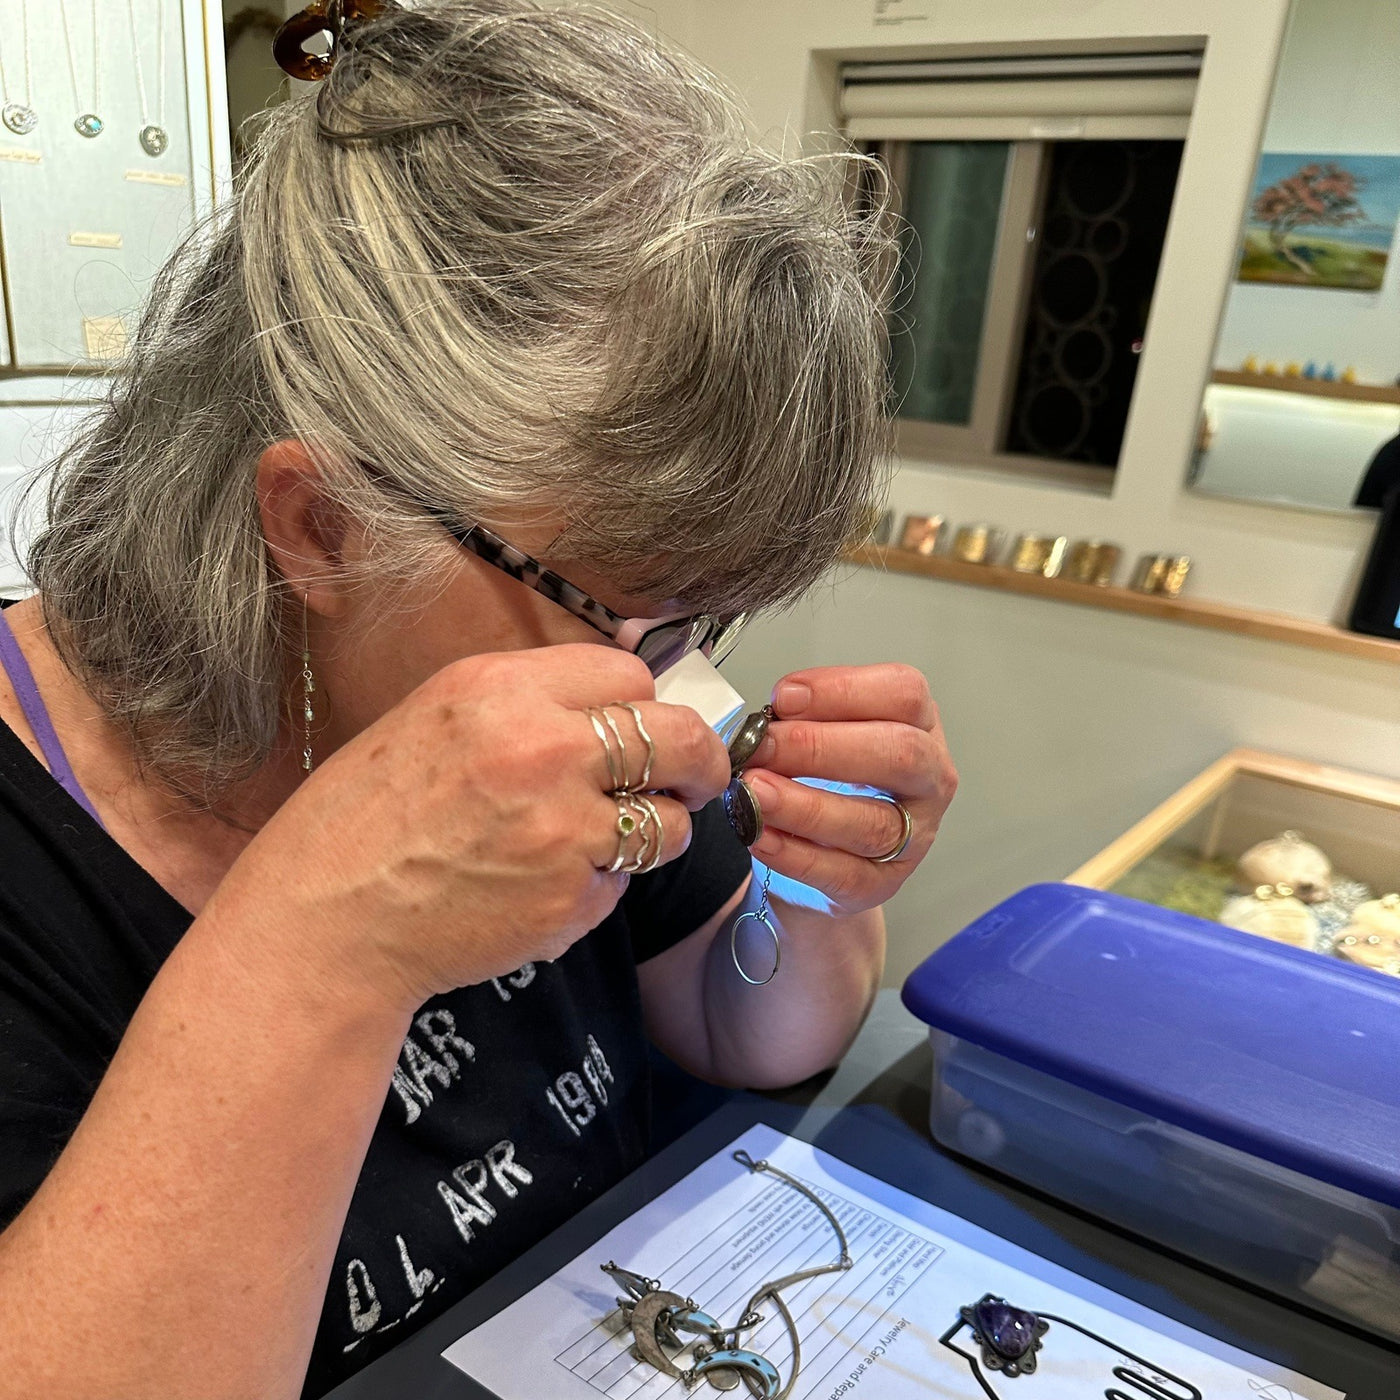 Jewelry Care & Repair - Wed June 5, 5:30-7:30pm @WEND